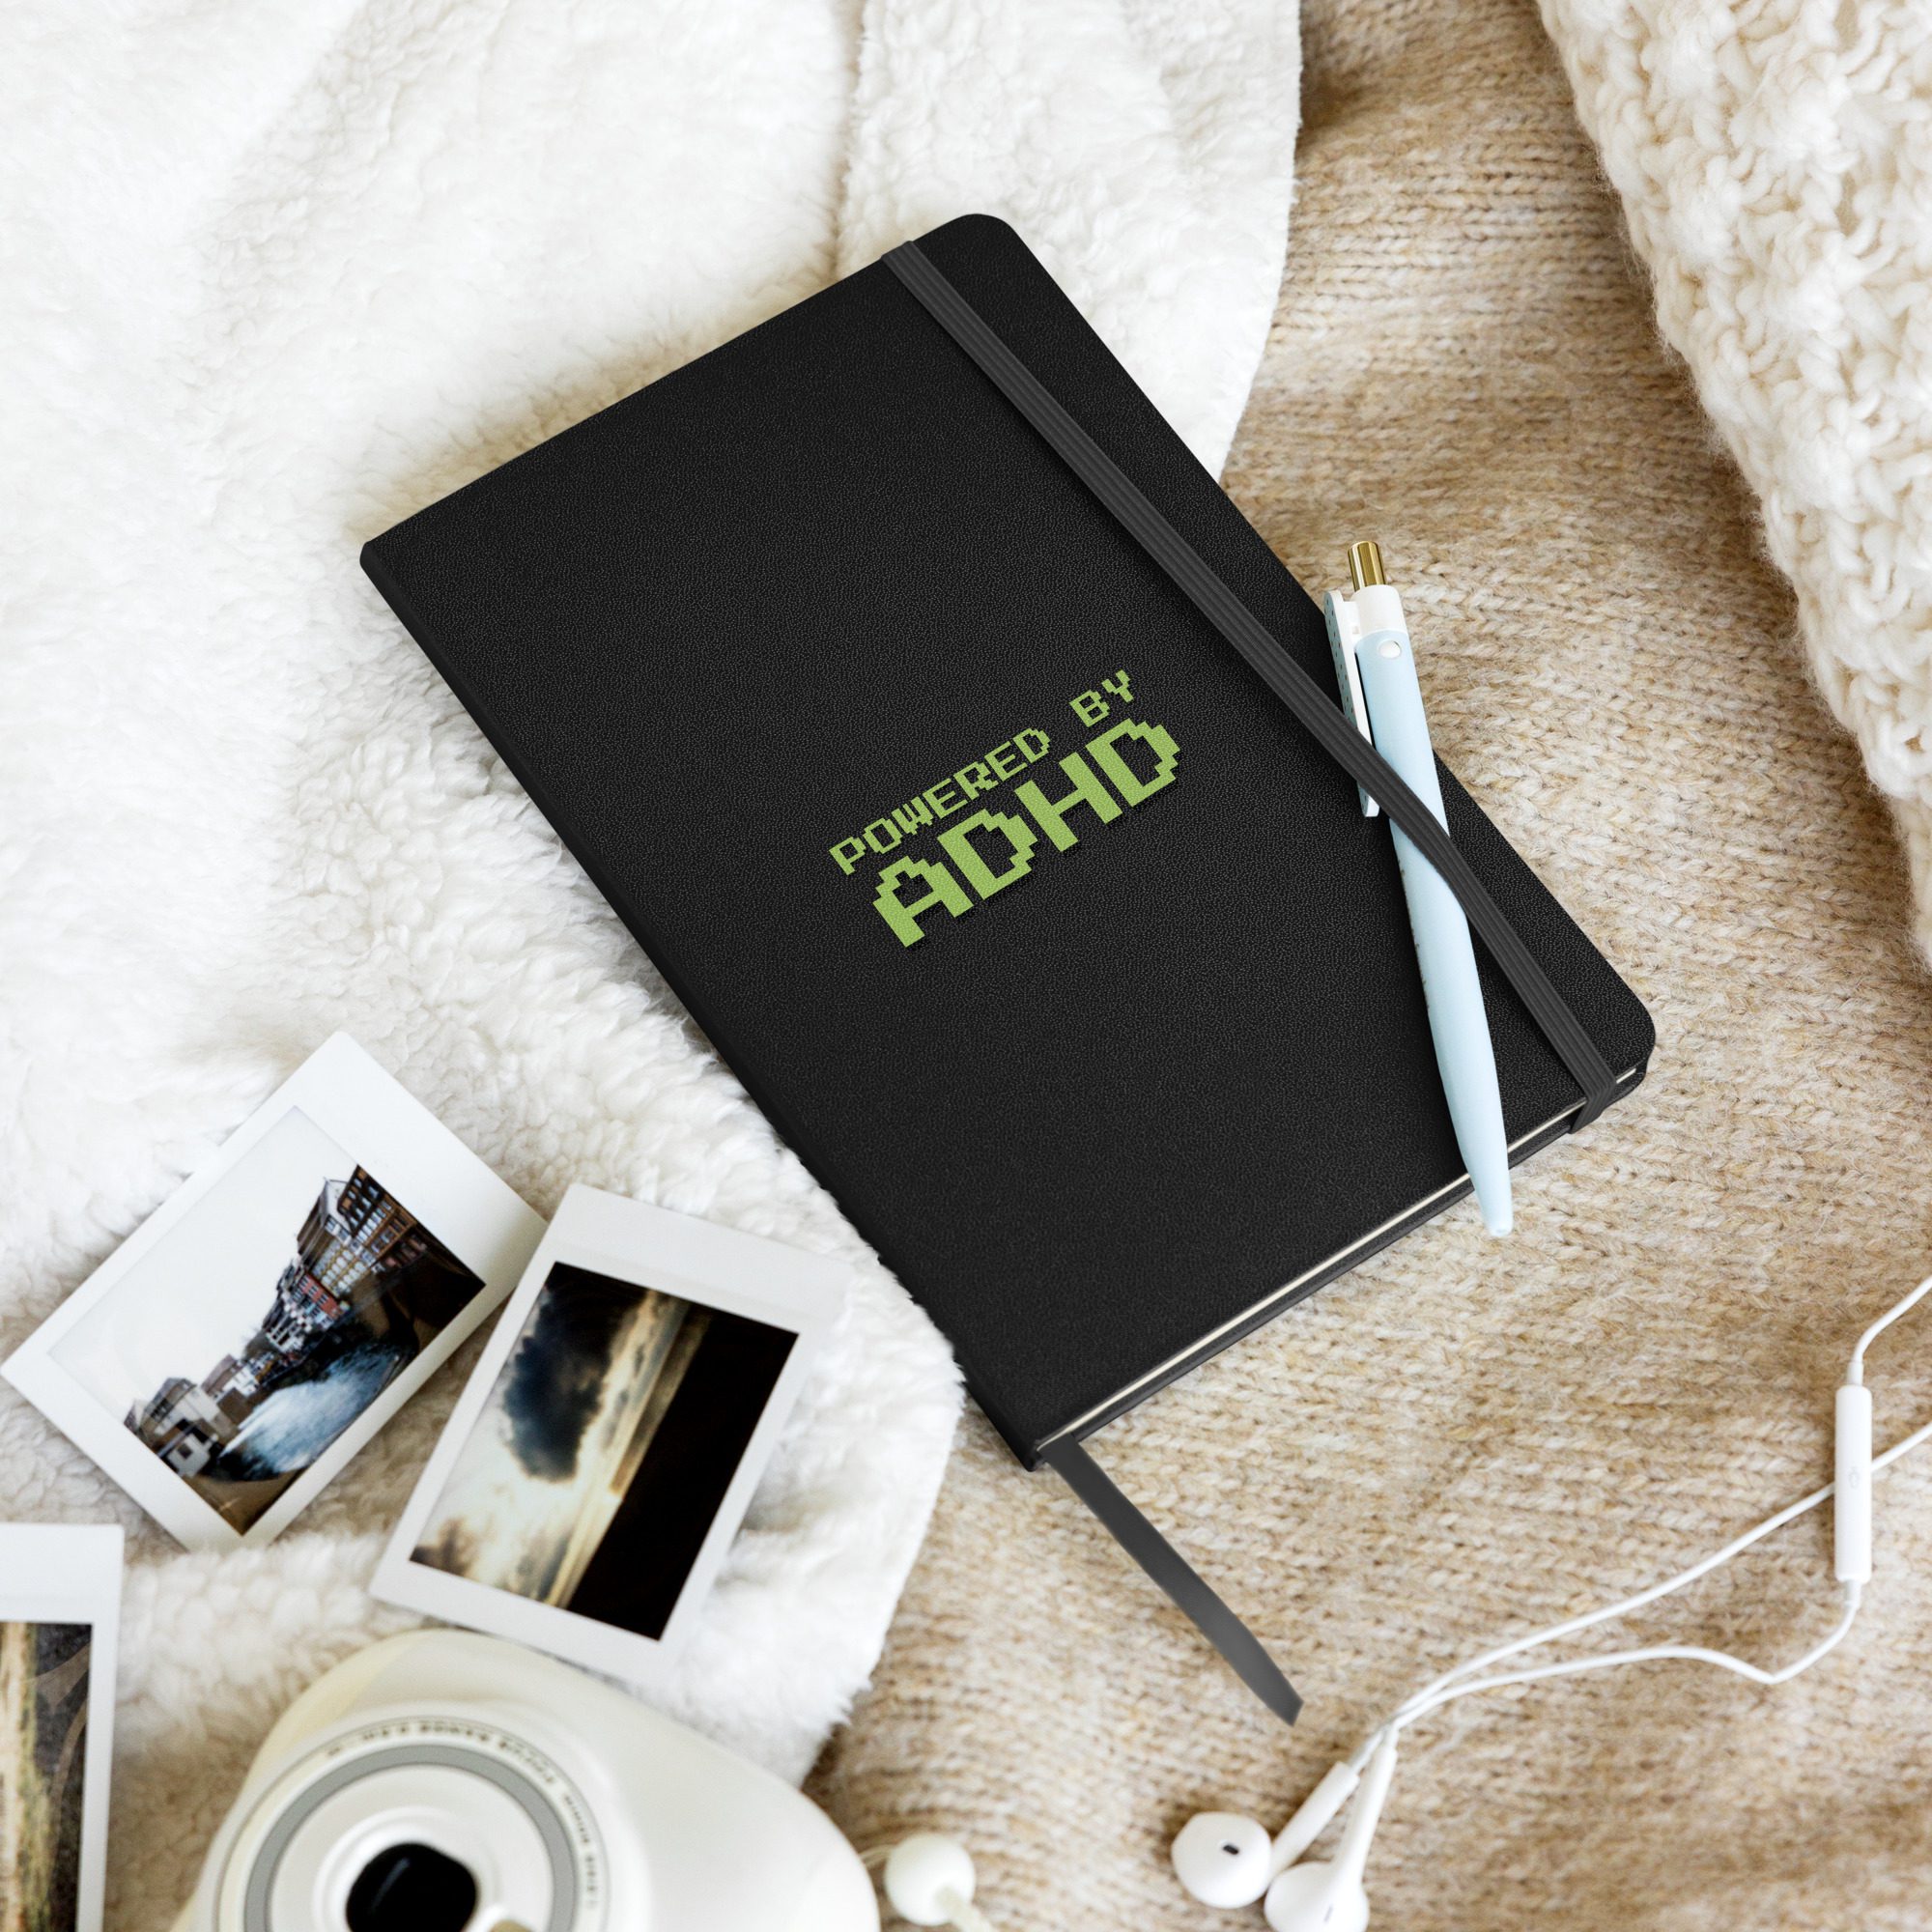 Powered By ADHD Hardcover Bound Notebook